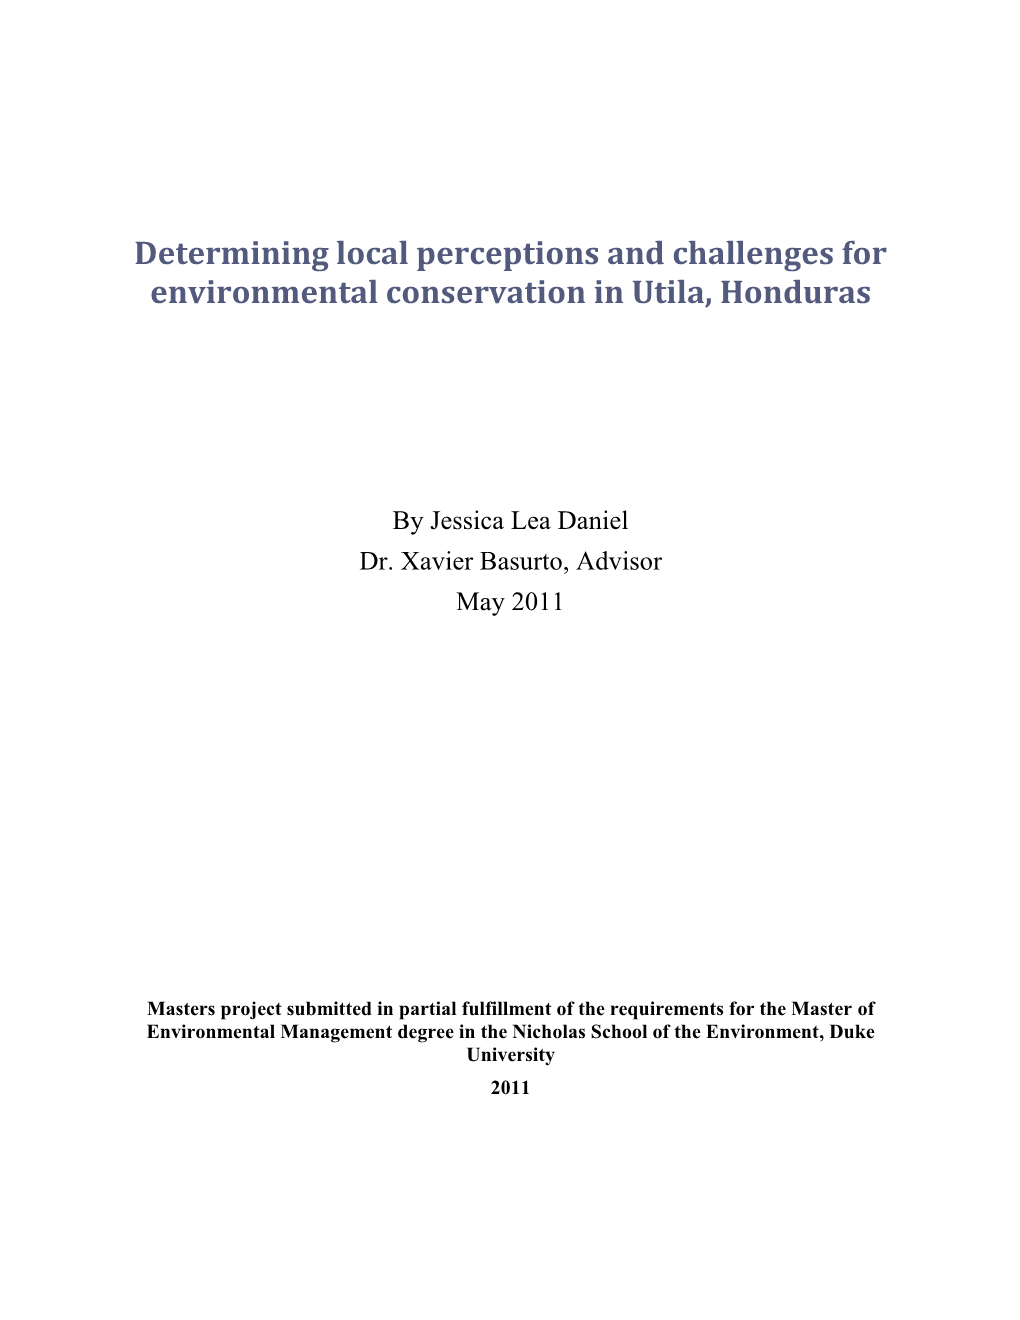 Determining Local Perceptions and Challenges for Environmental Conservation in Utila, Honduras